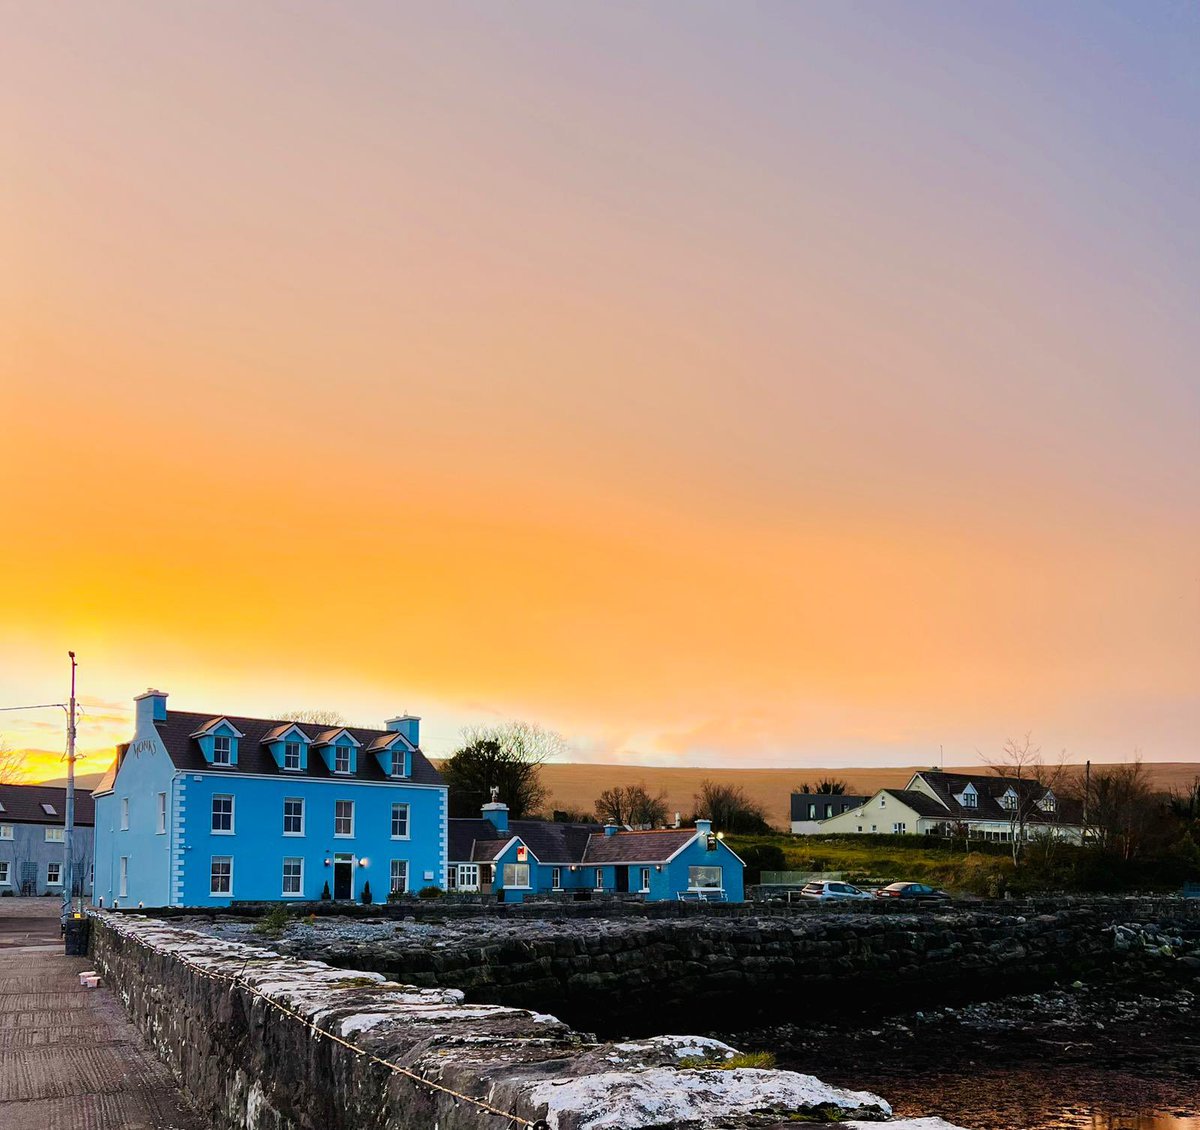 Our mid-week winter offer continues throughout January and February. Visit beautiful Ballyvaughan and enjoy dinner, bed & breakfast for just €115pps. Visit monks.ie to book now.